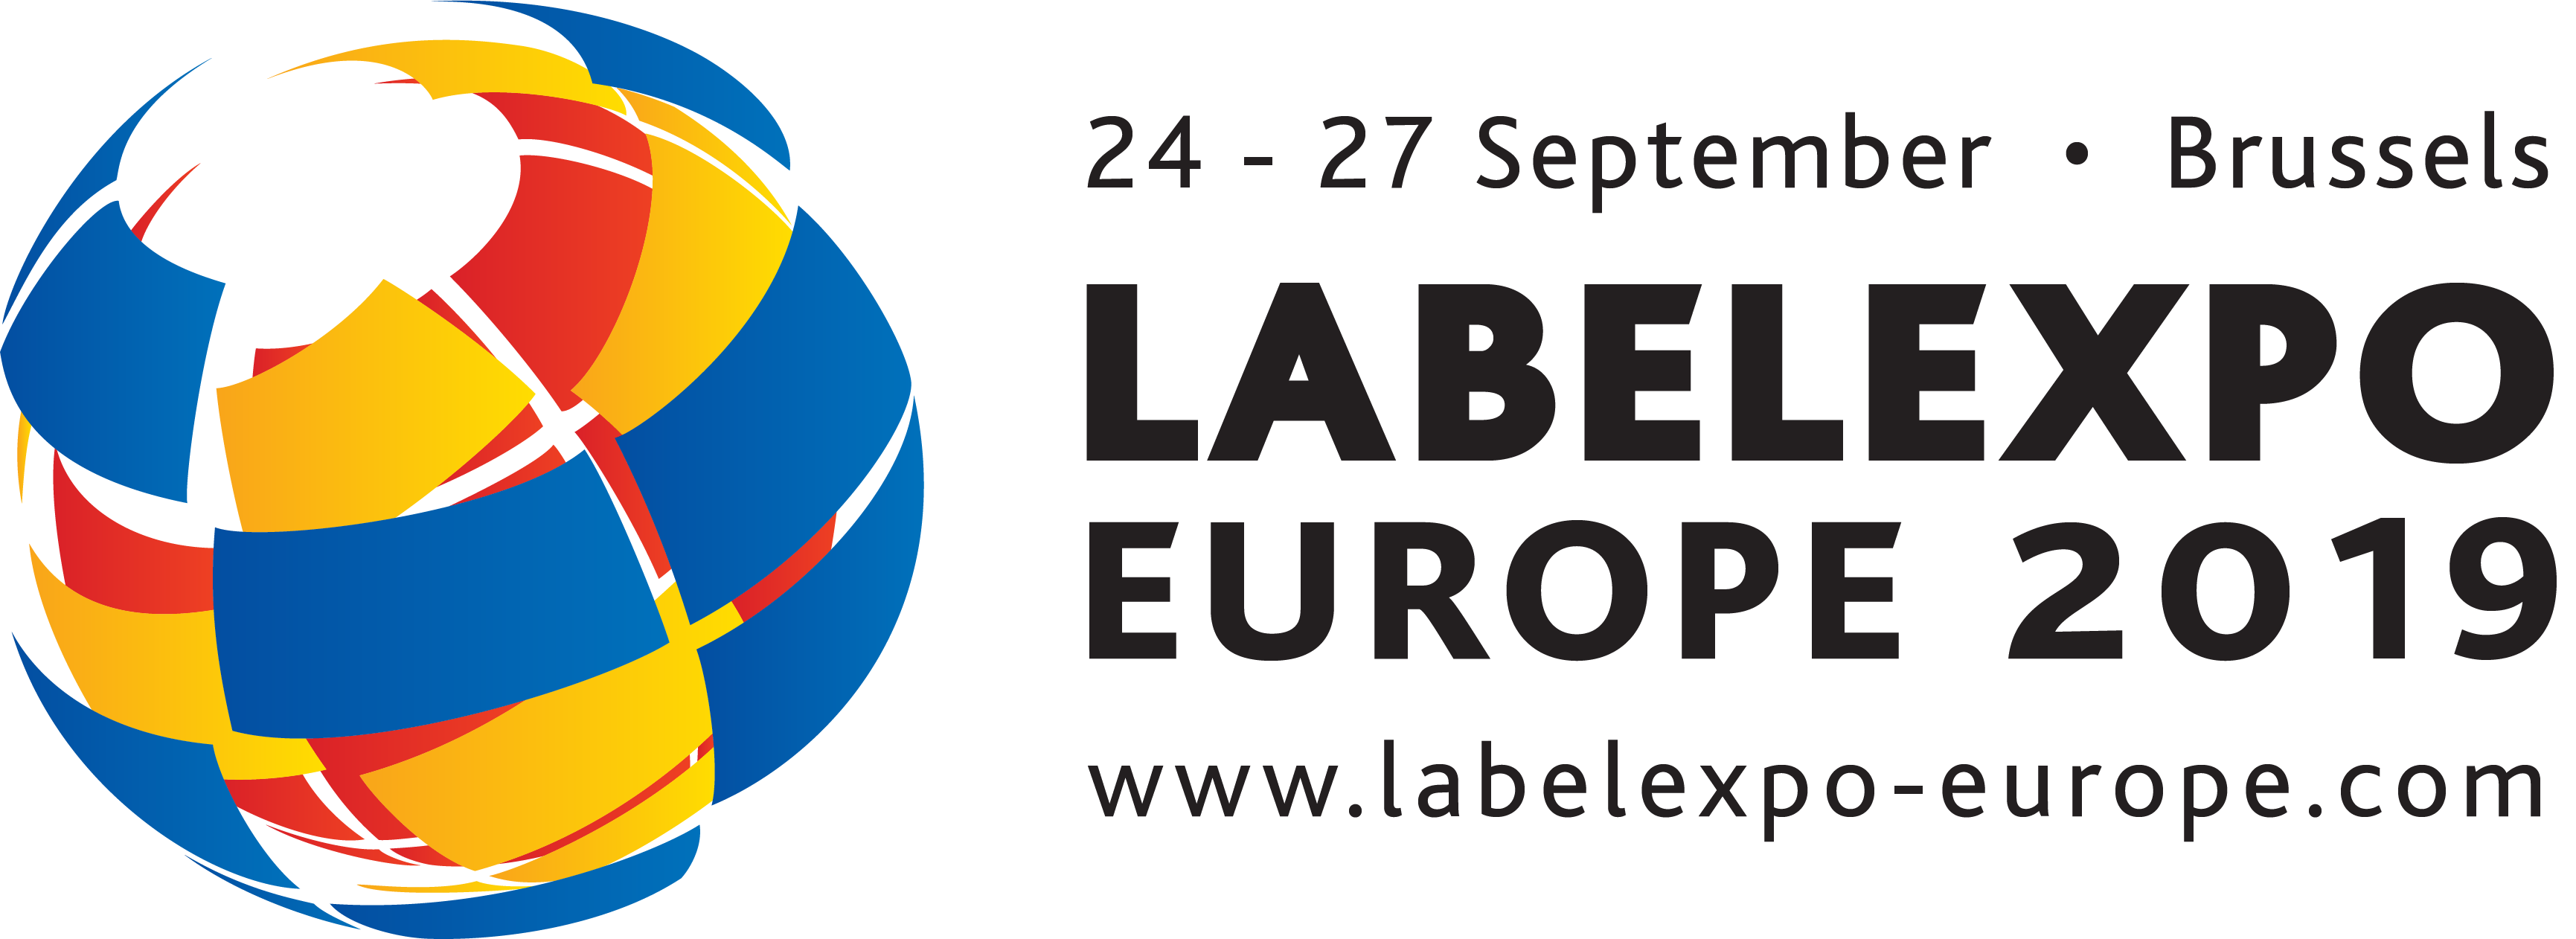 Registration now open for Labelexpo Europe 2019